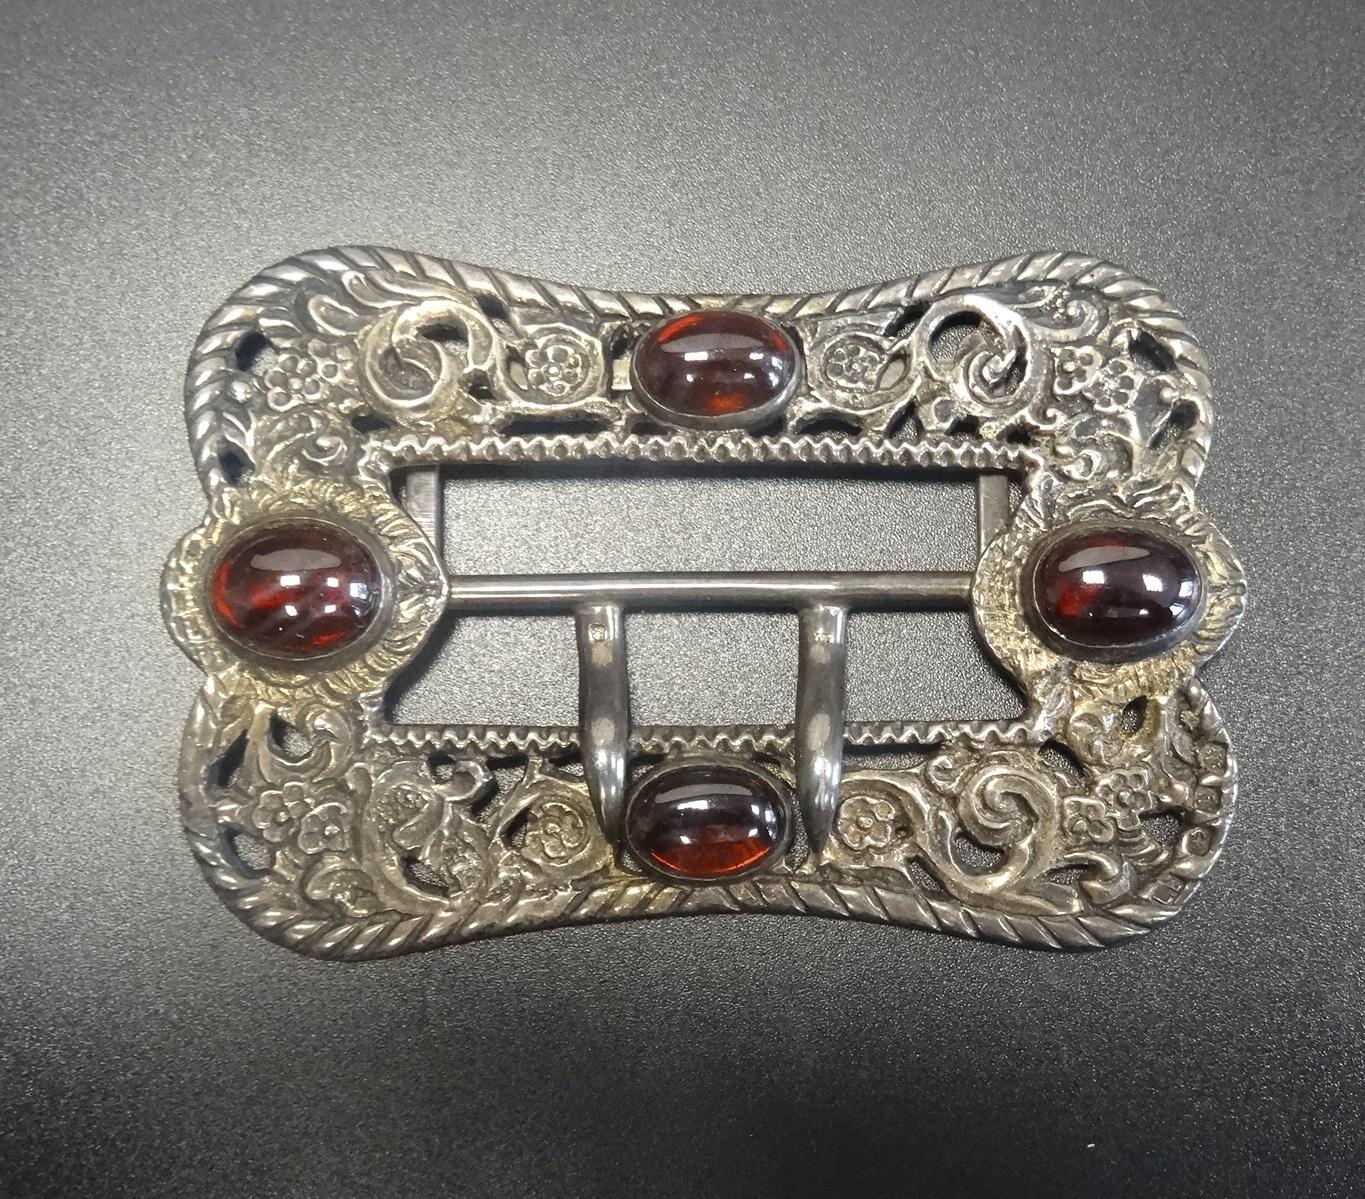 LATE VICTORIAN BELT BUCKLE with cabochon set stones to the decorative pierced and scrolled buckle,